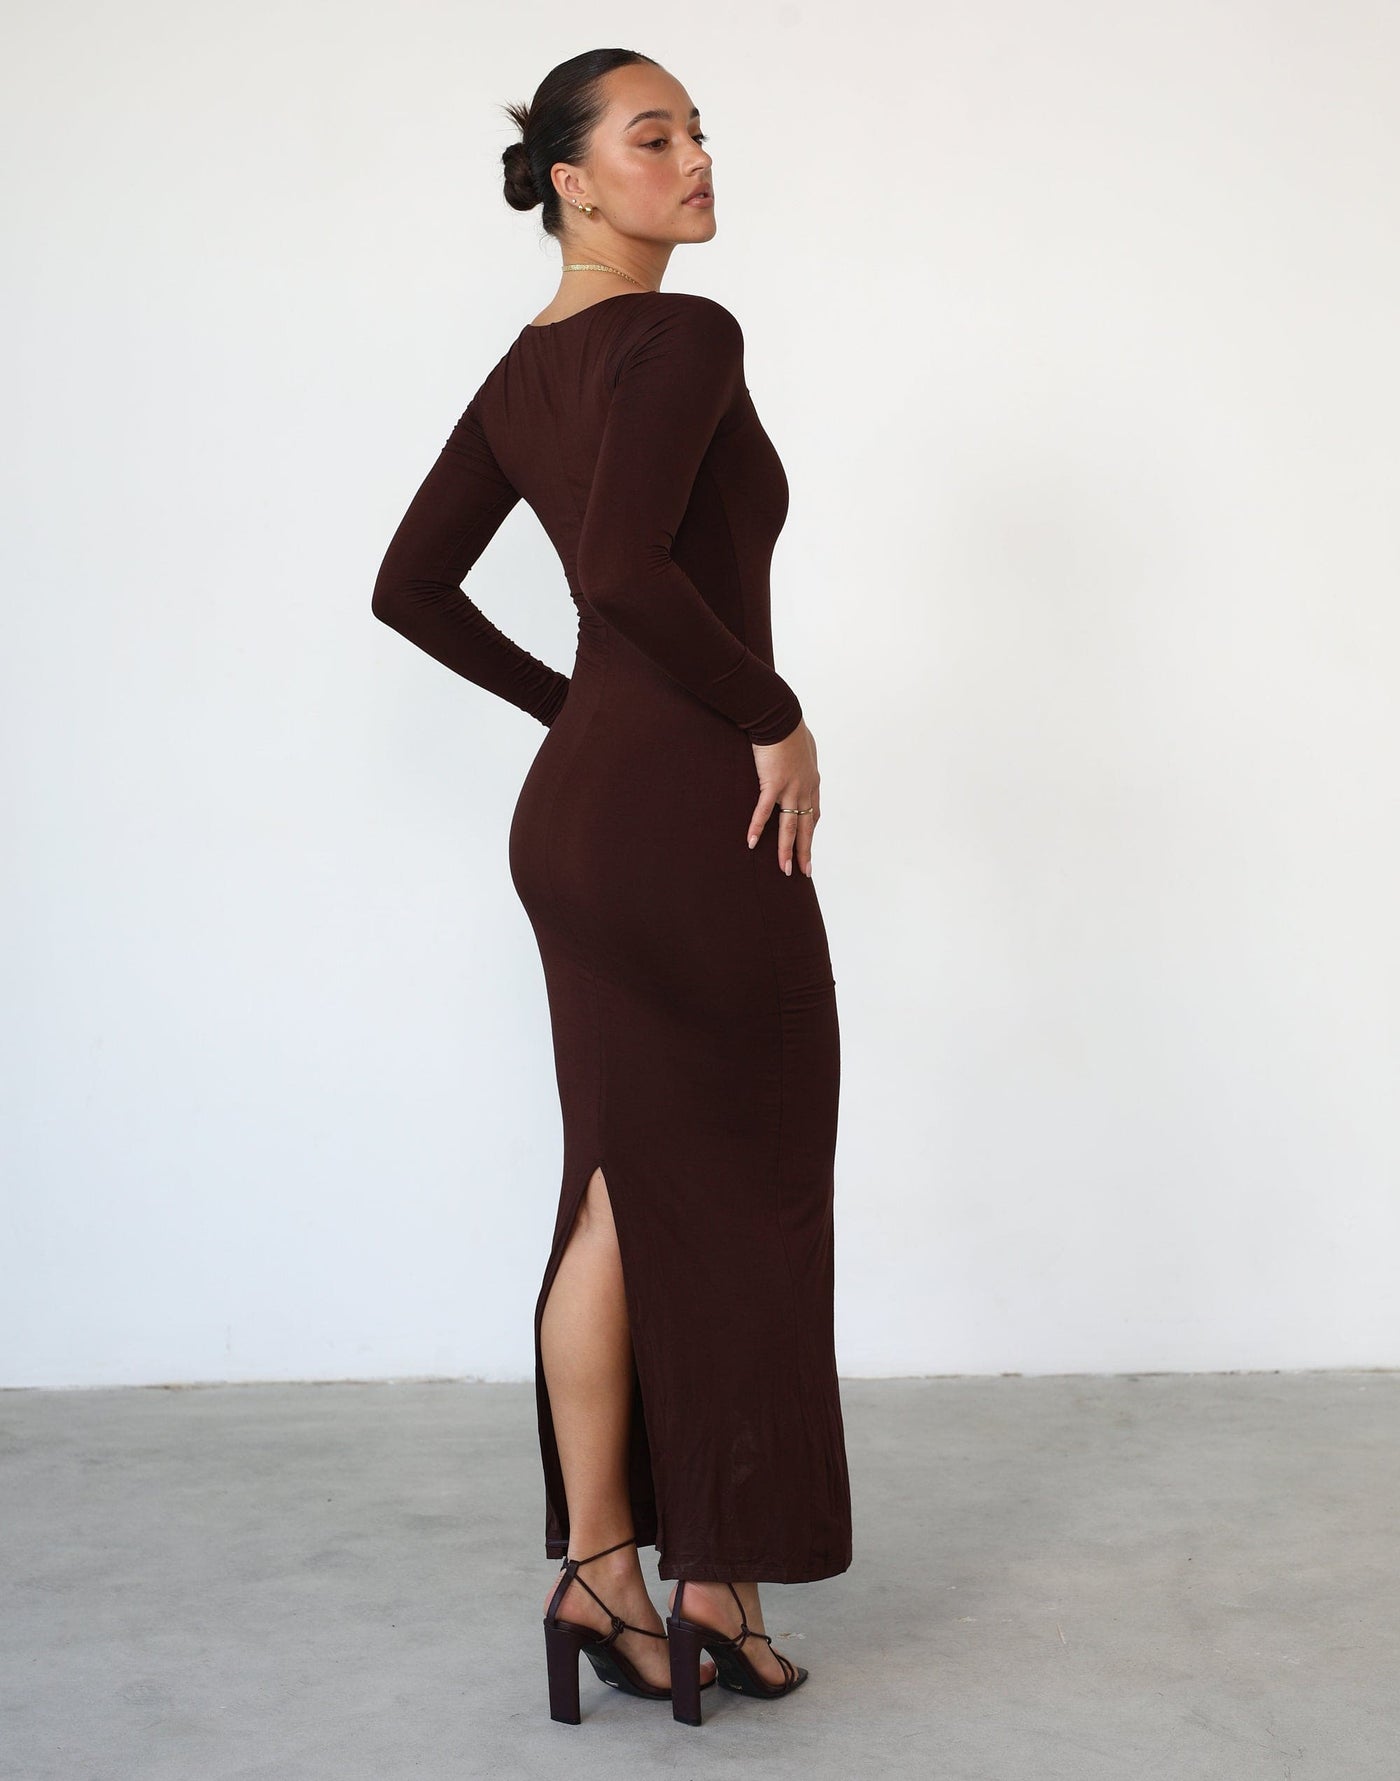 Eyes On Me Maxi Dress (Cocoa) - Long Sleeved Fitted Square Neck Maxi - Women's Dress - Charcoal Clothing